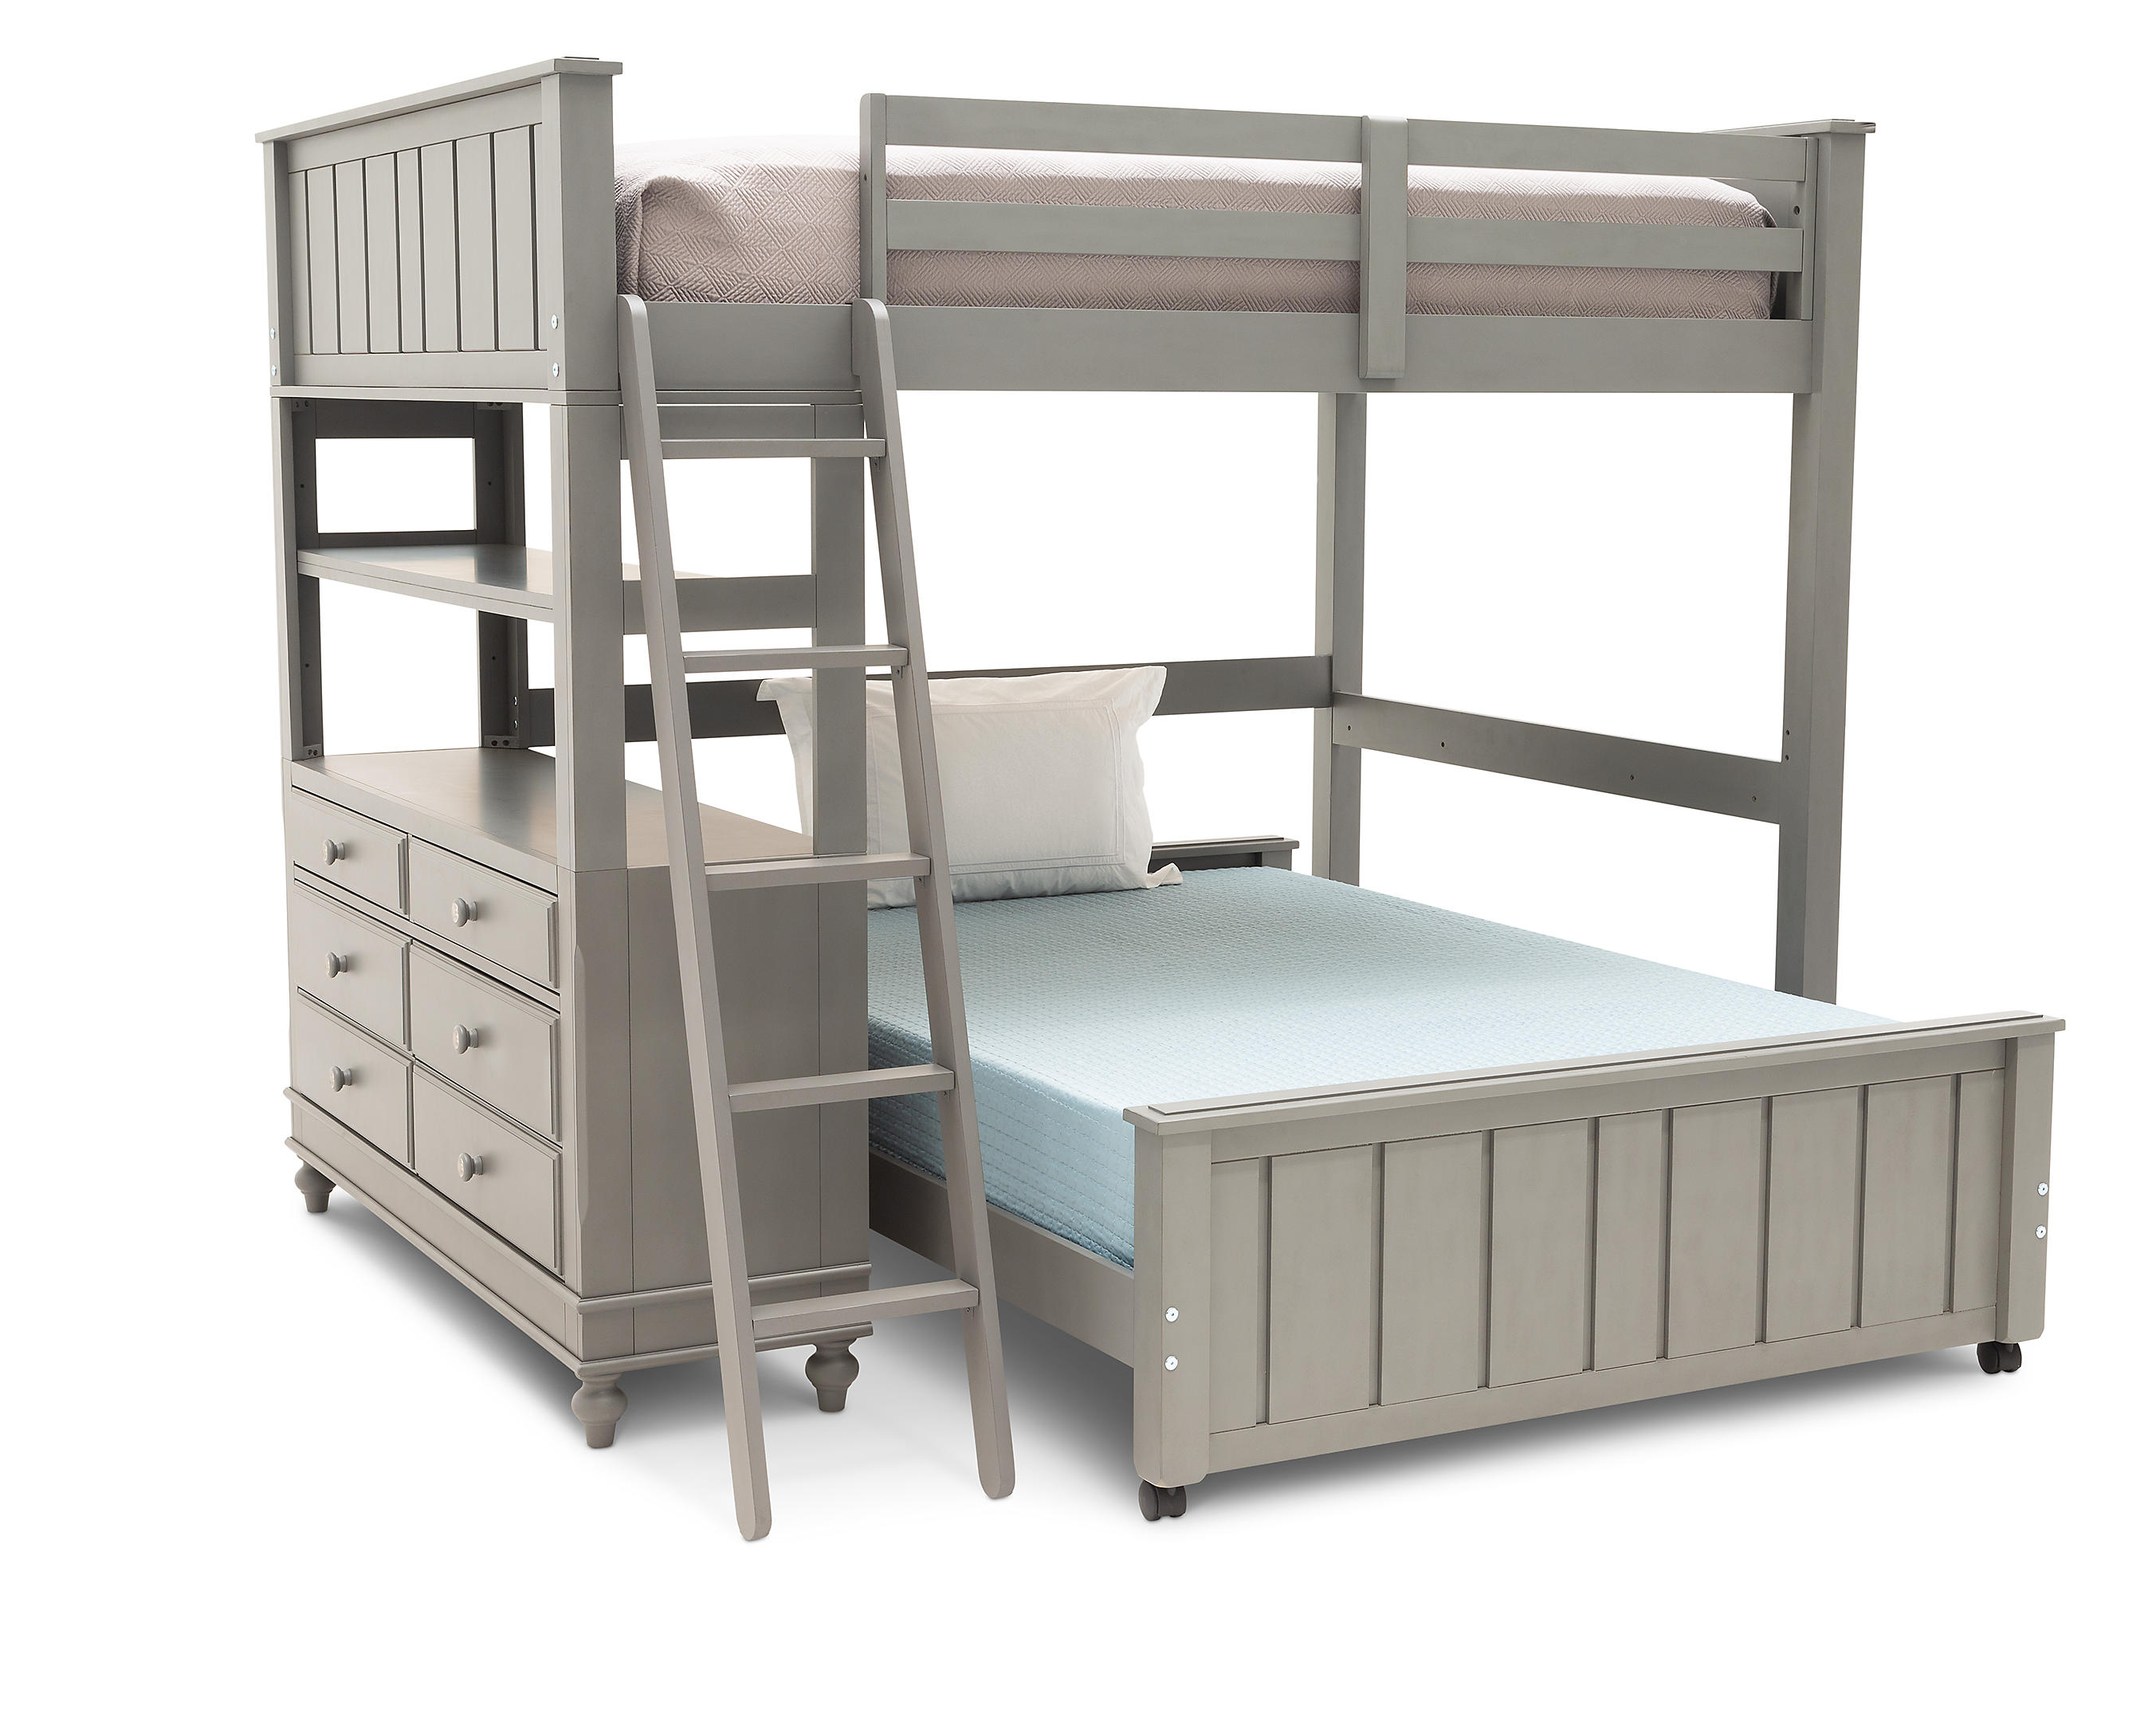 Lake House Loft Bed With Full Lower, Furniture Row Bunk Beds